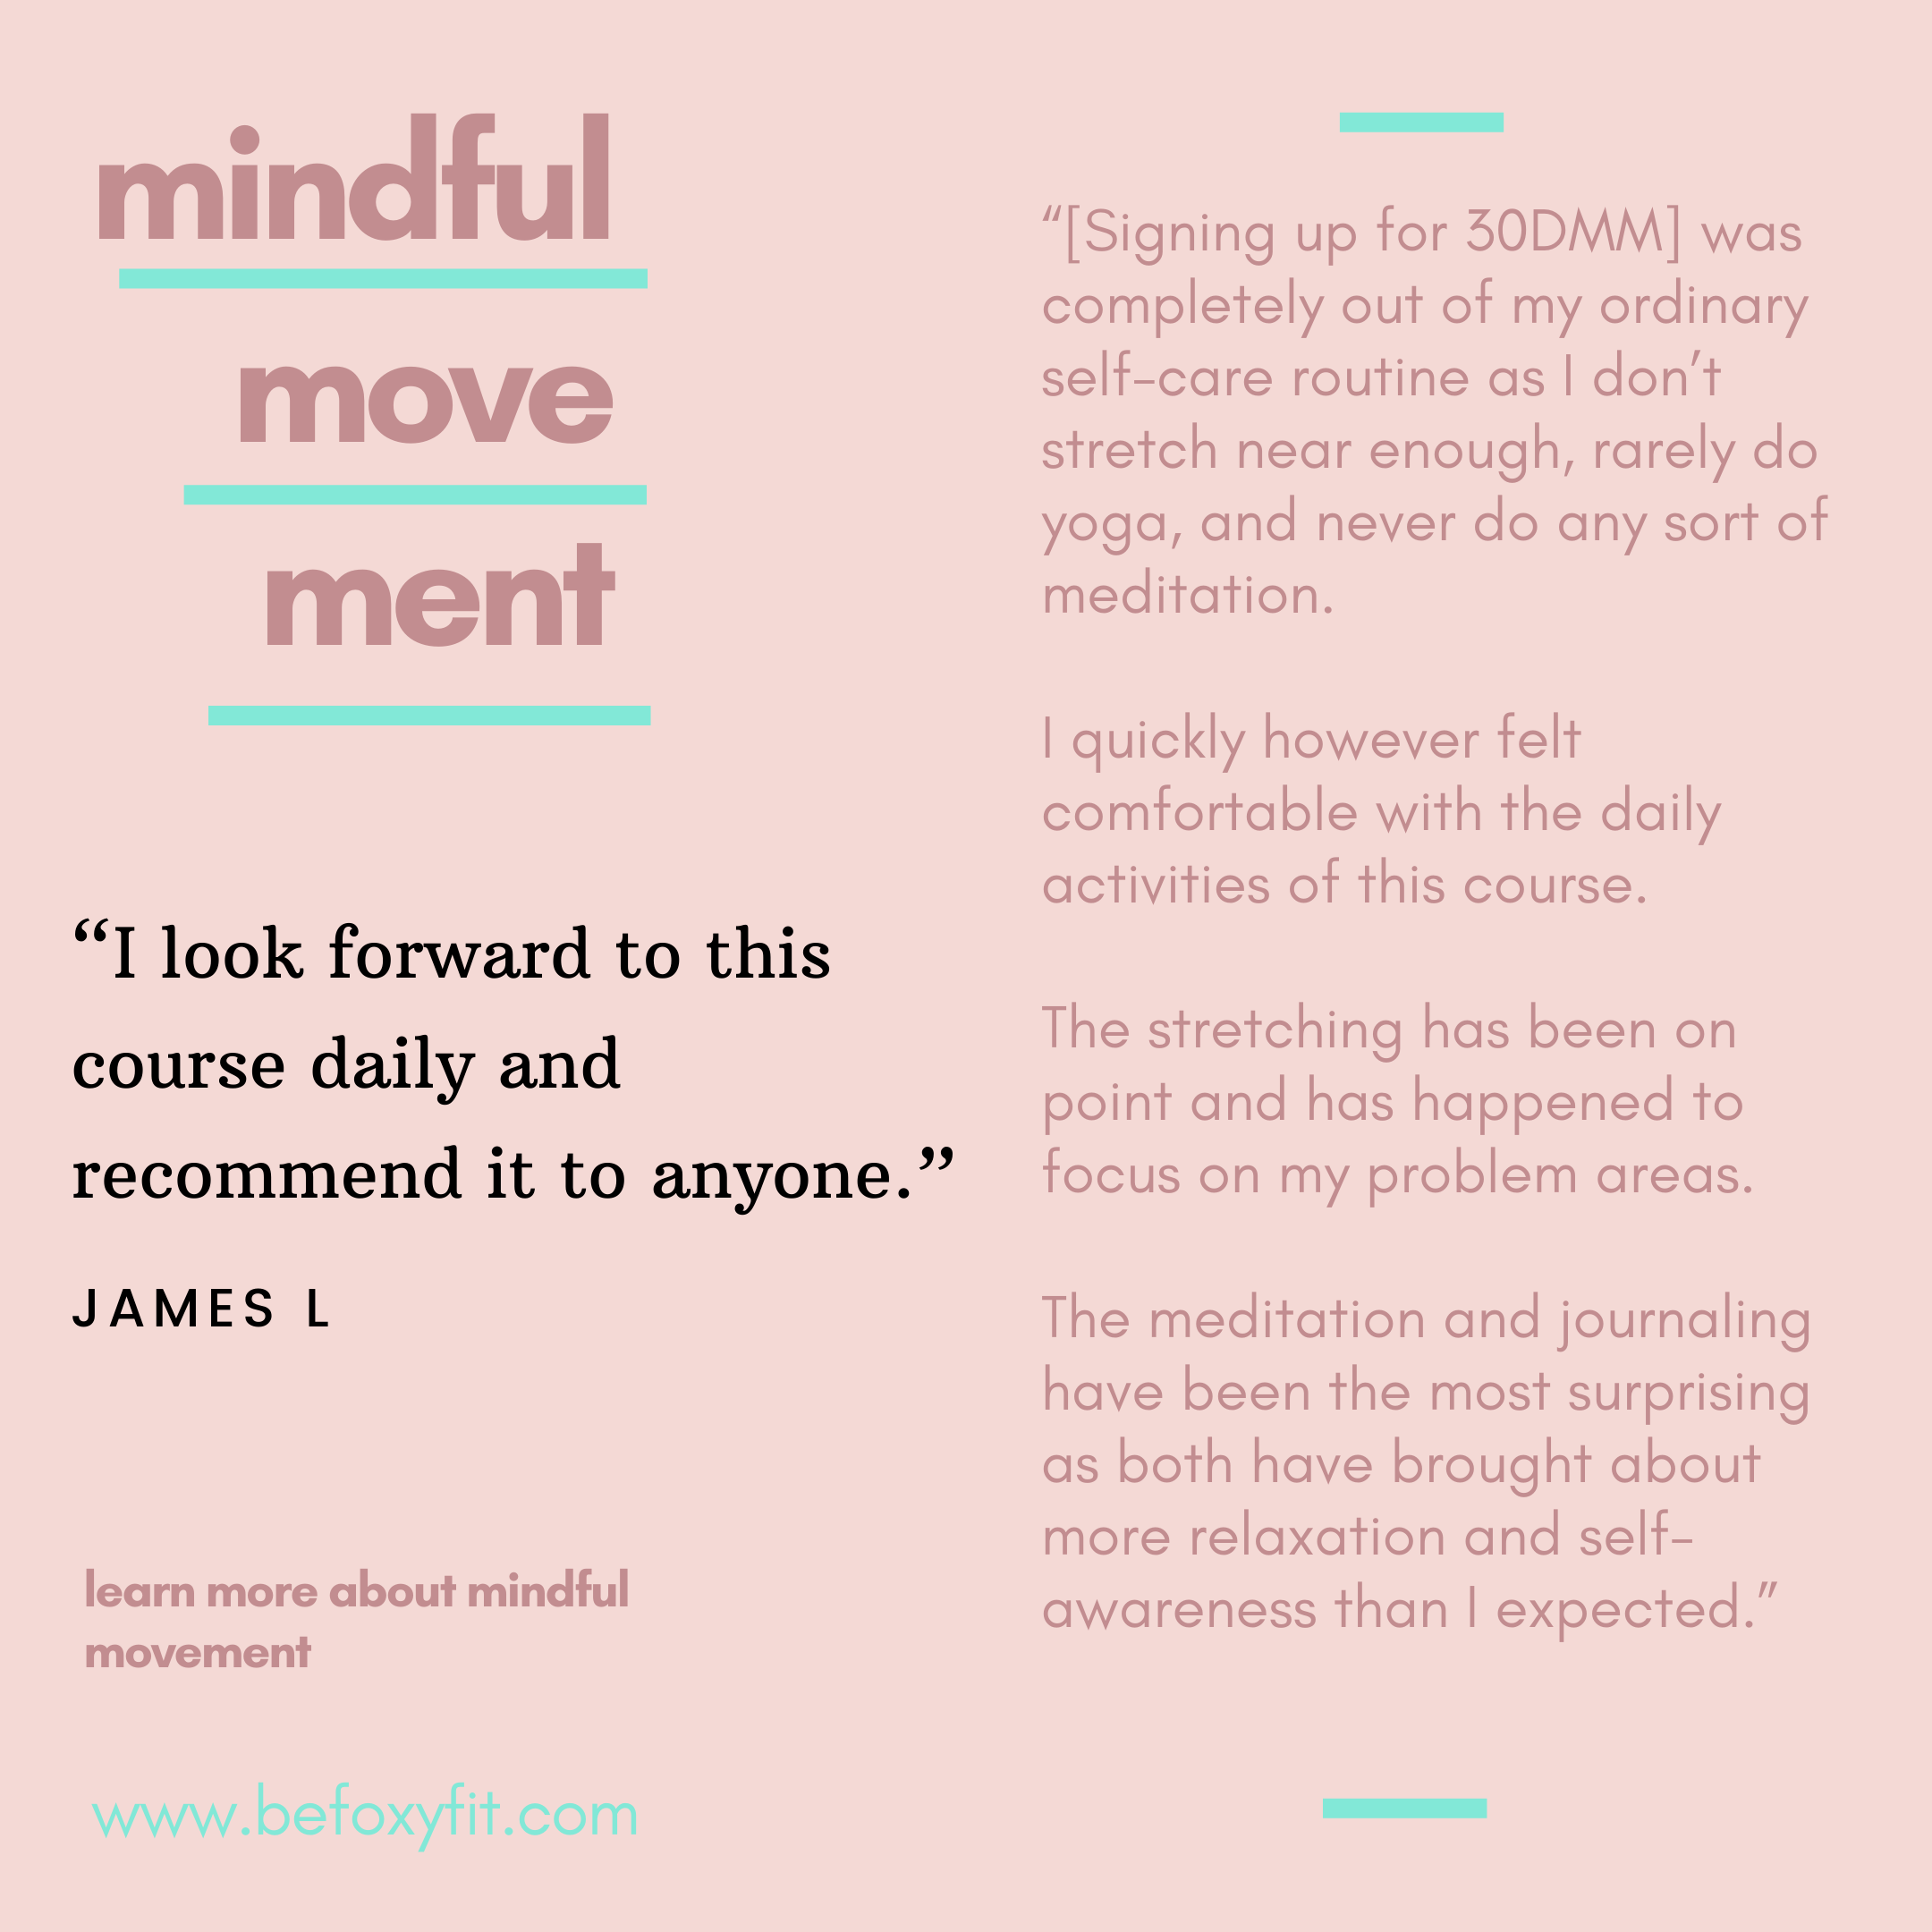 Copy of mindful move ment.png